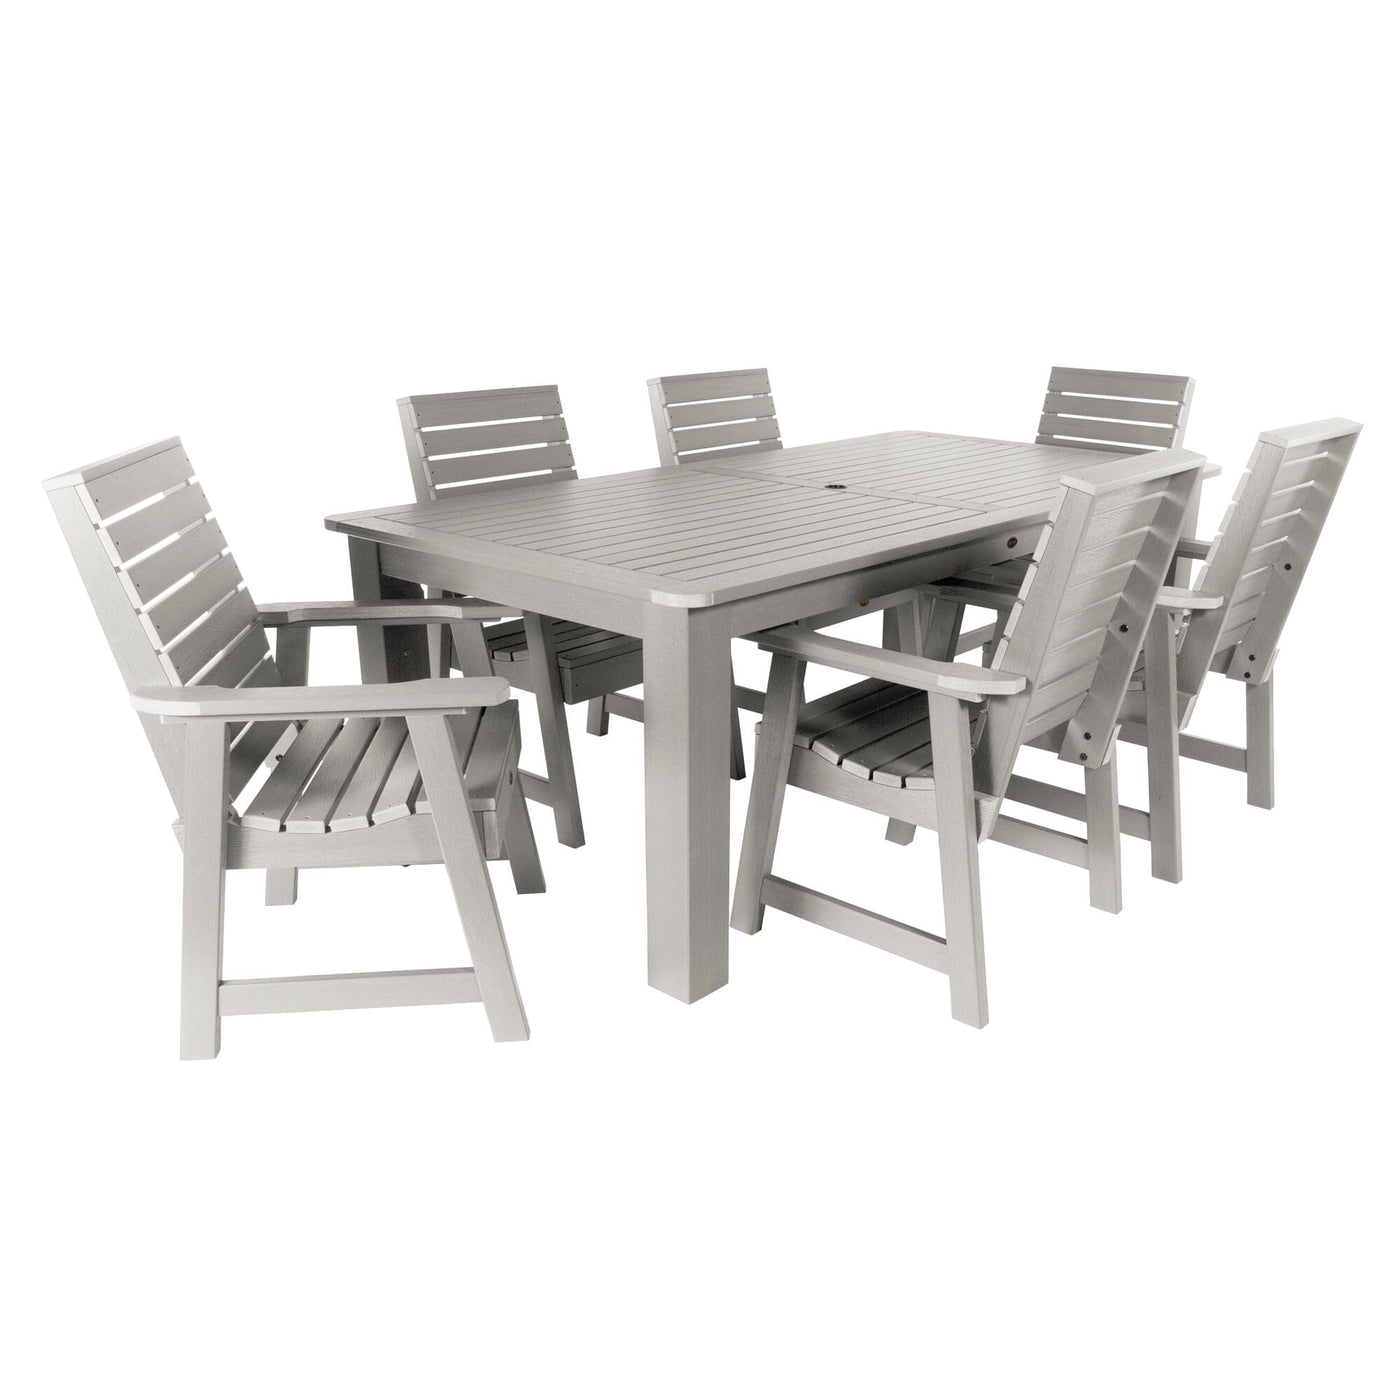 Weatherly 7pc Rectangular Dining Set 42in x 72in - Counter Height Dining Highwood USA Harbor Gray 